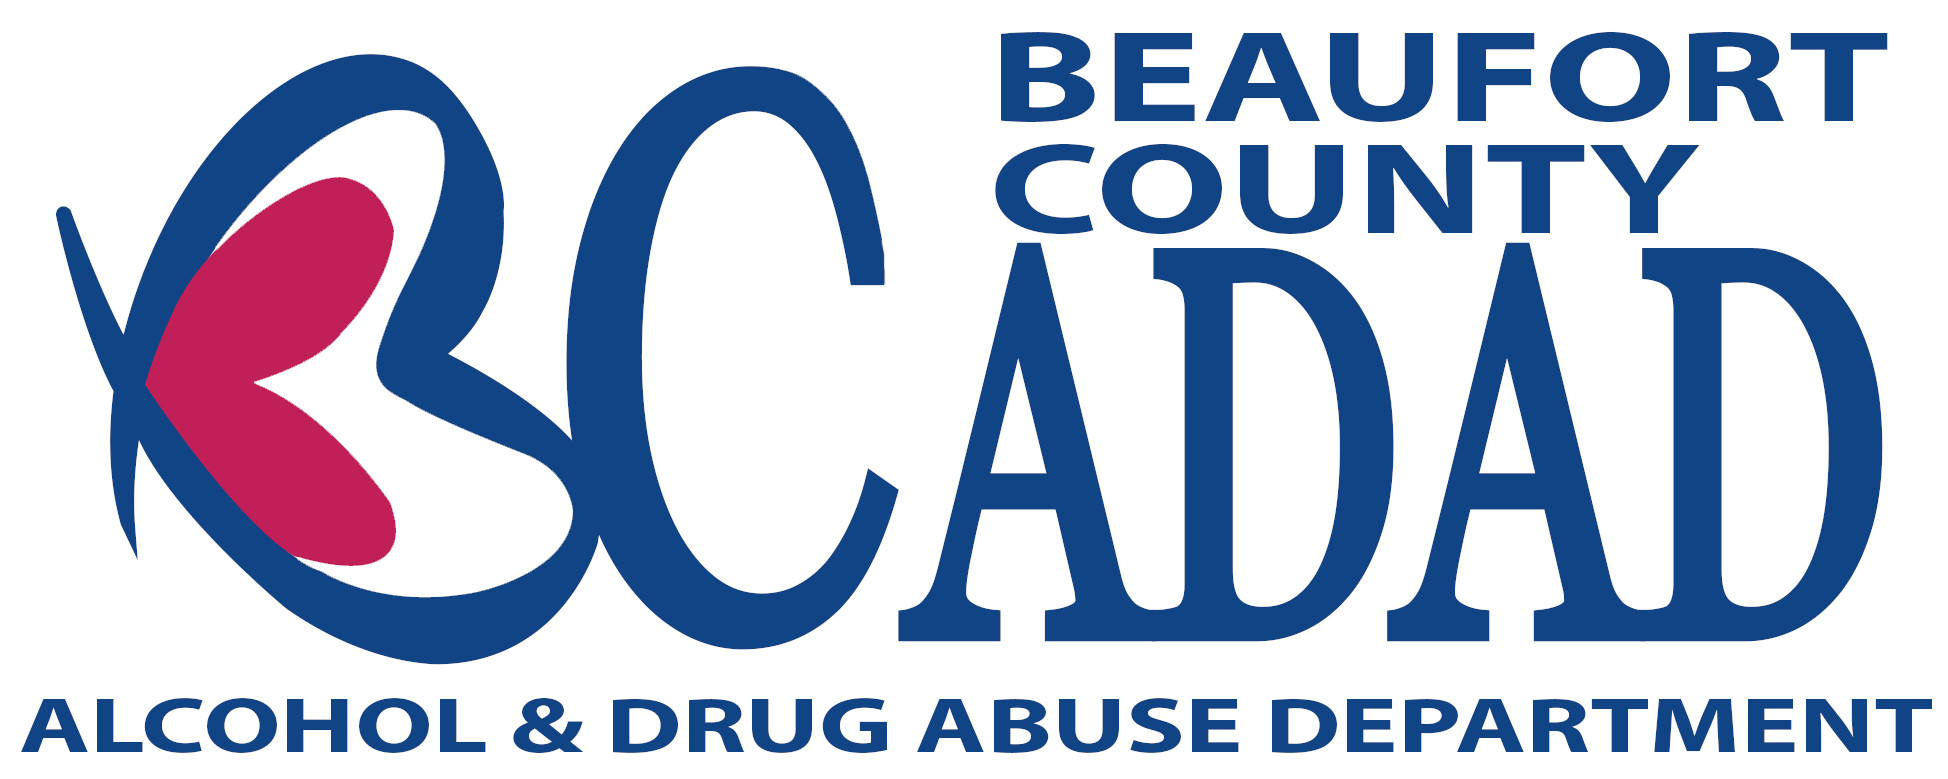 Free 5 Minute Narcan Training to be Held Curbside Saturday, November 20, in Bluffton and Beaufort 